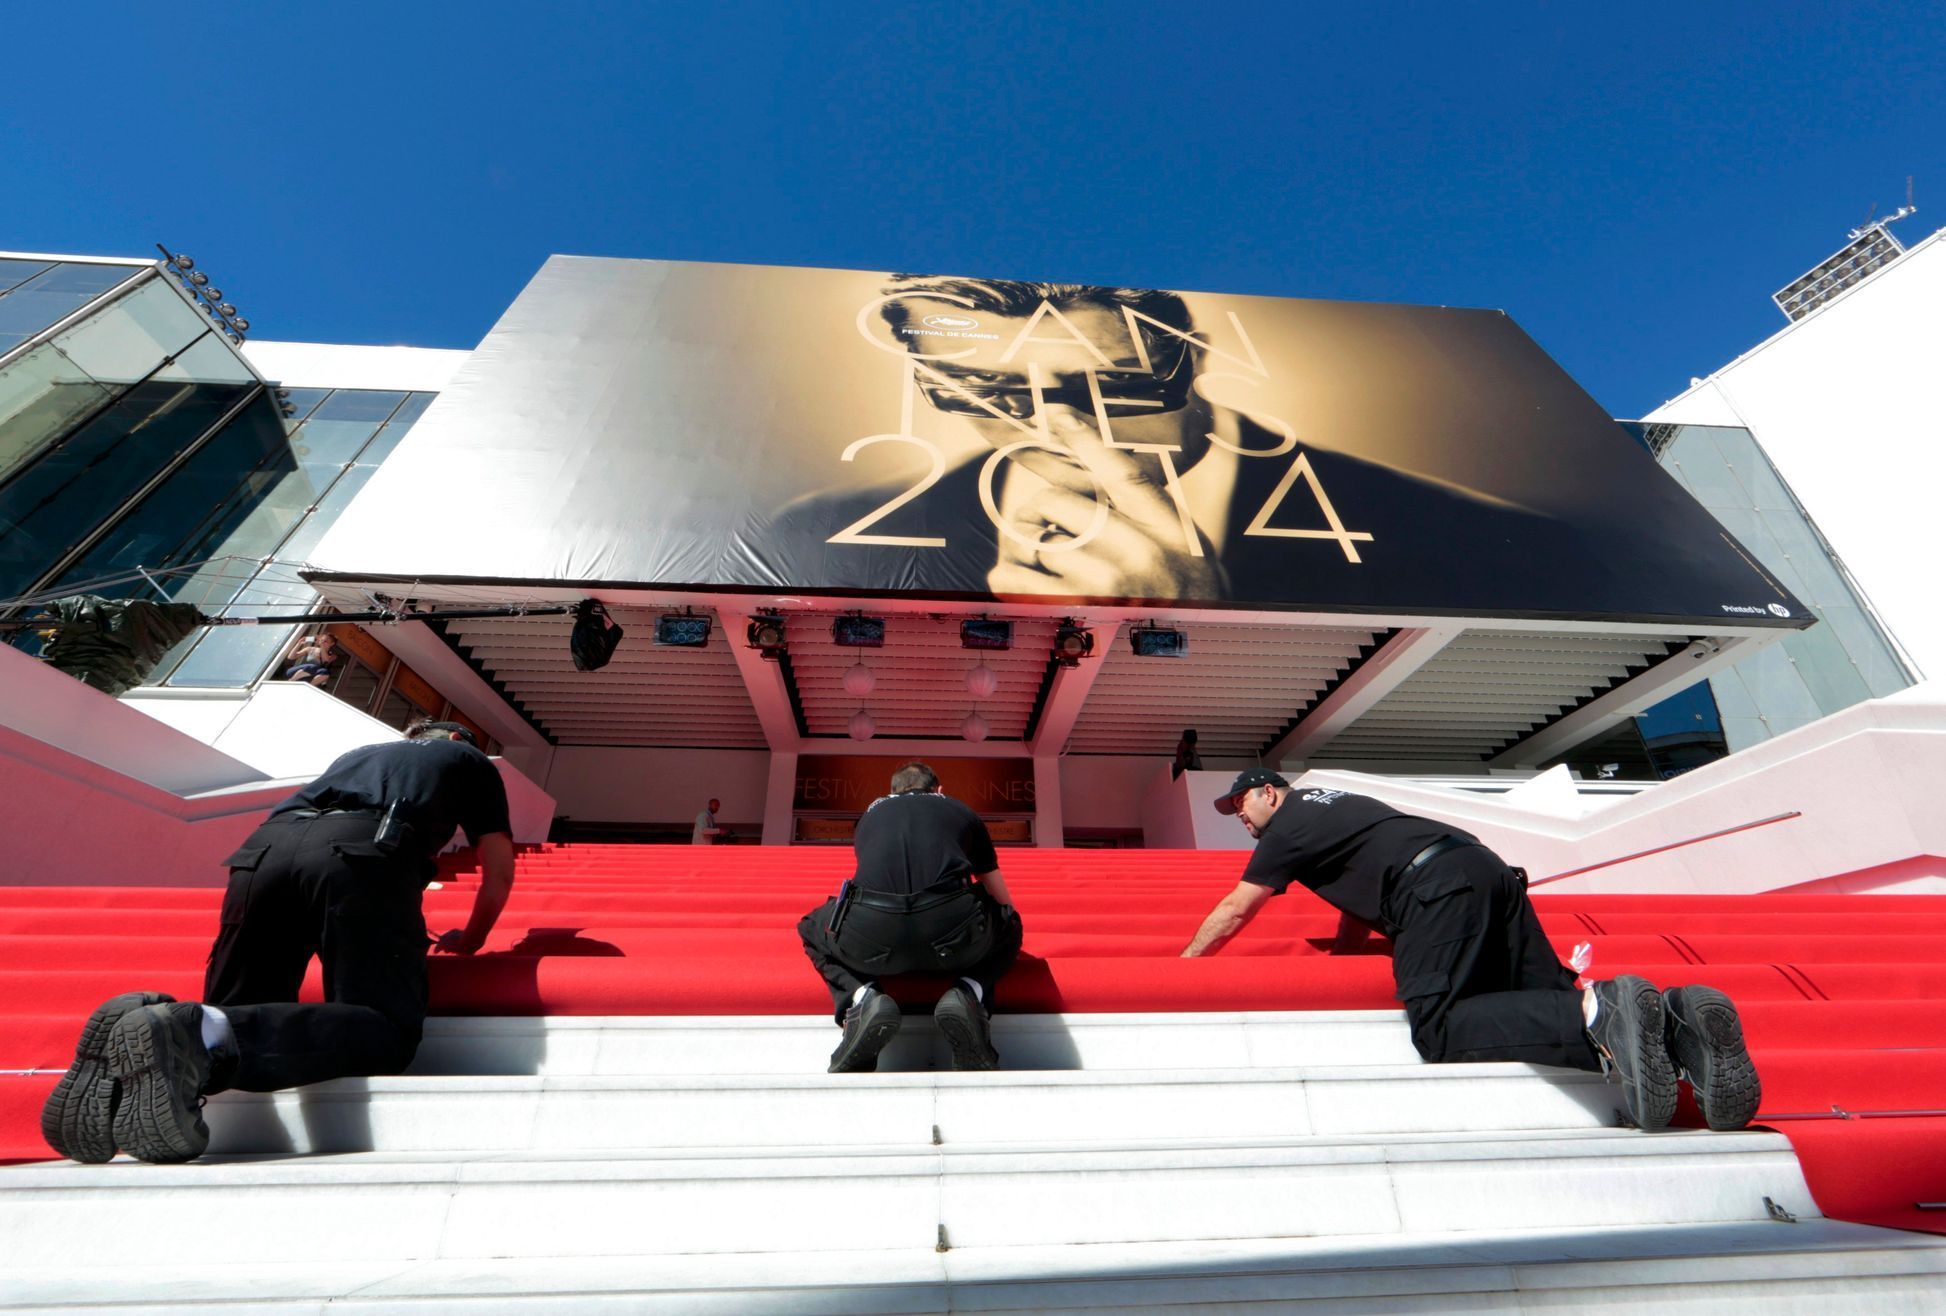 Workers install the red carpet in front of the main entrance of the Festival Palace for the opening ceremony of the 67th Cannes Film Festival in Cannes